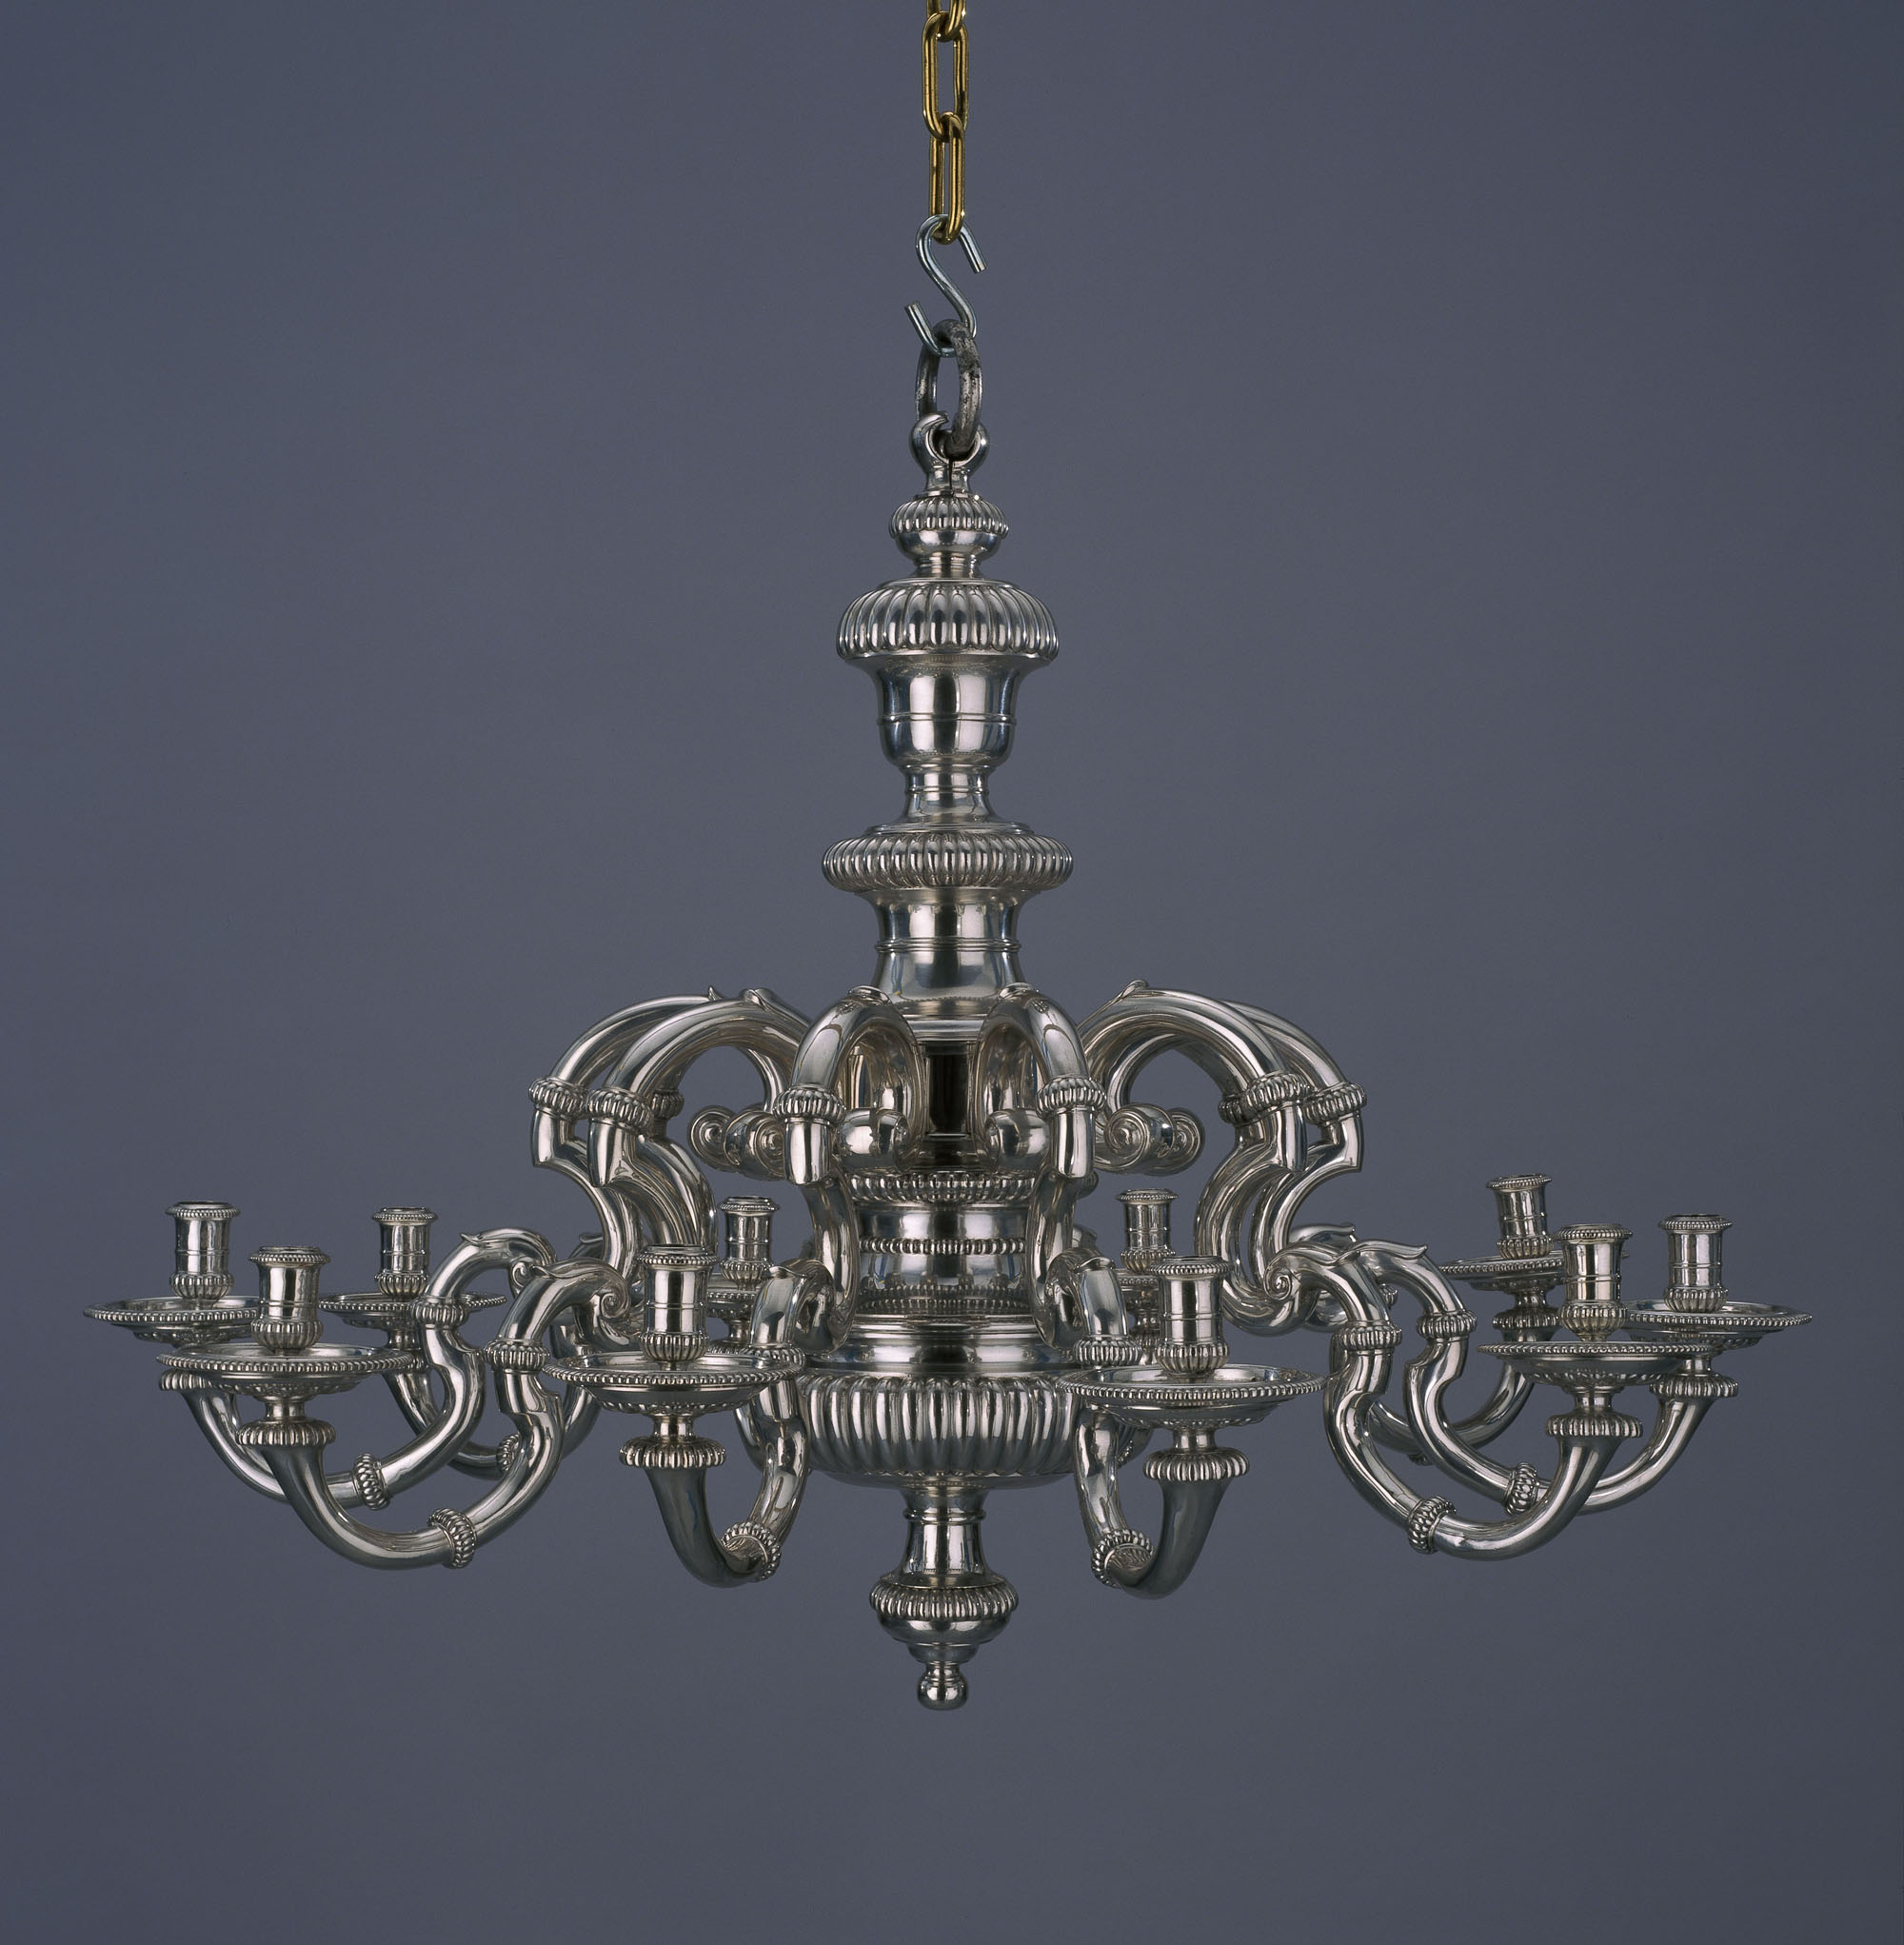 Chandelier  marked by Daniel Garnier (active ca. 1691-1698) , London, 1691-1697,  silver and iron.  The Art Museums of Colonial Williamsburg, museum purchase, 1938-42